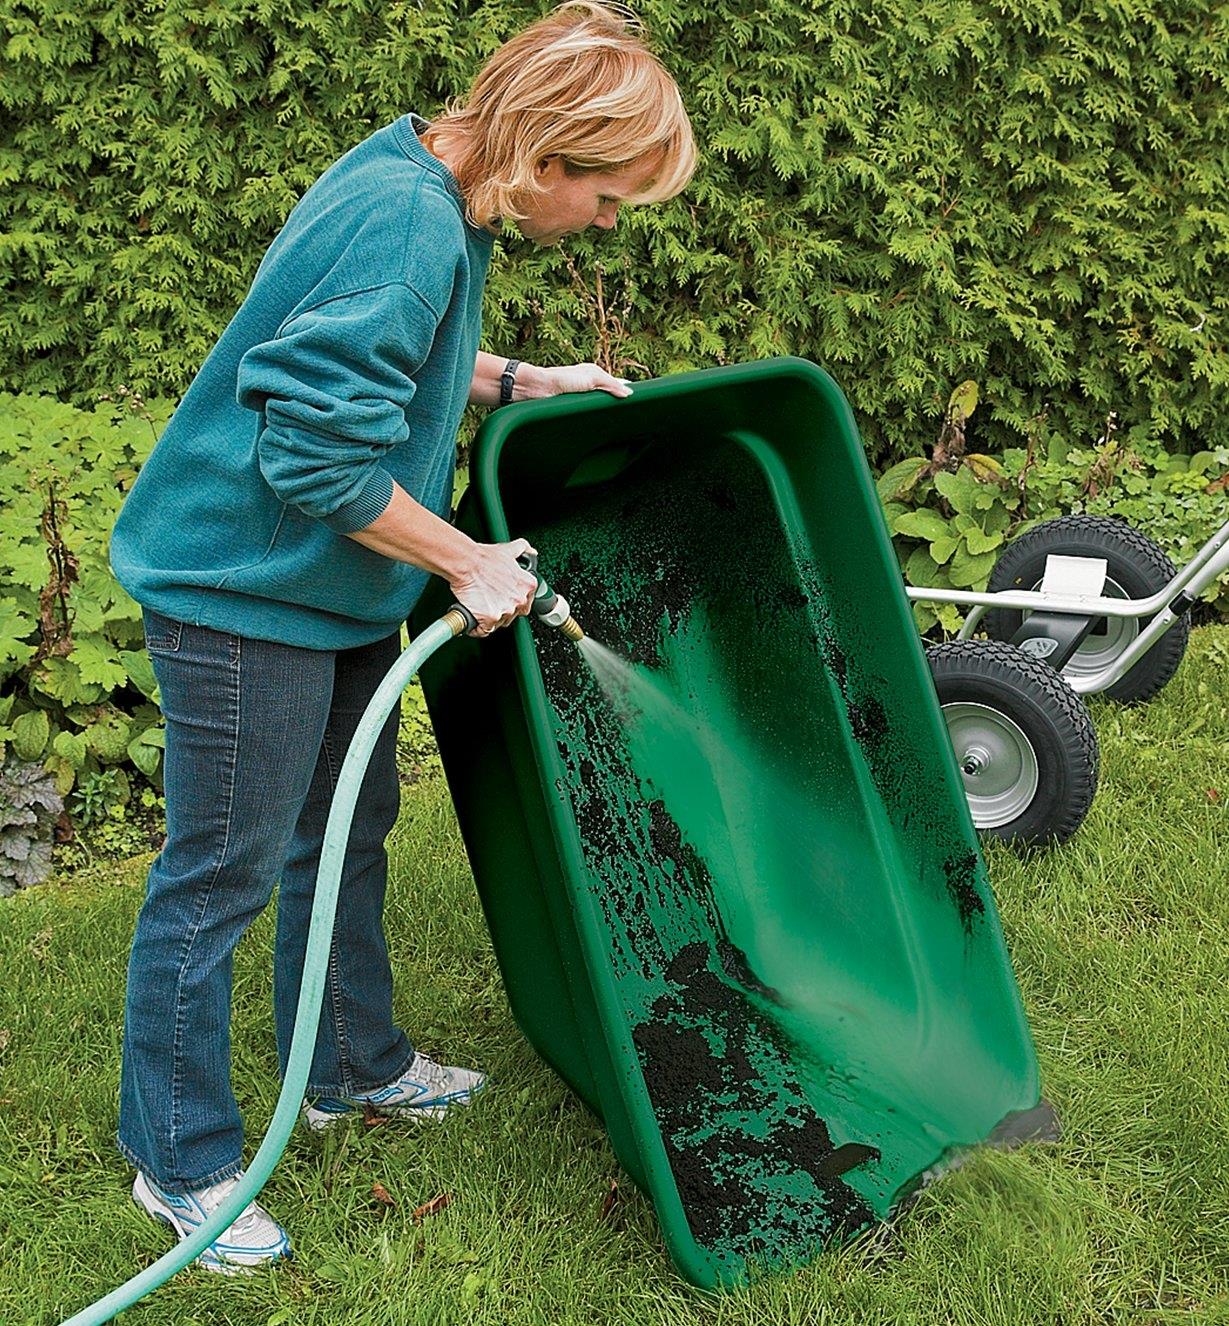 A woman uses a hose to rinse out a Smart Cart